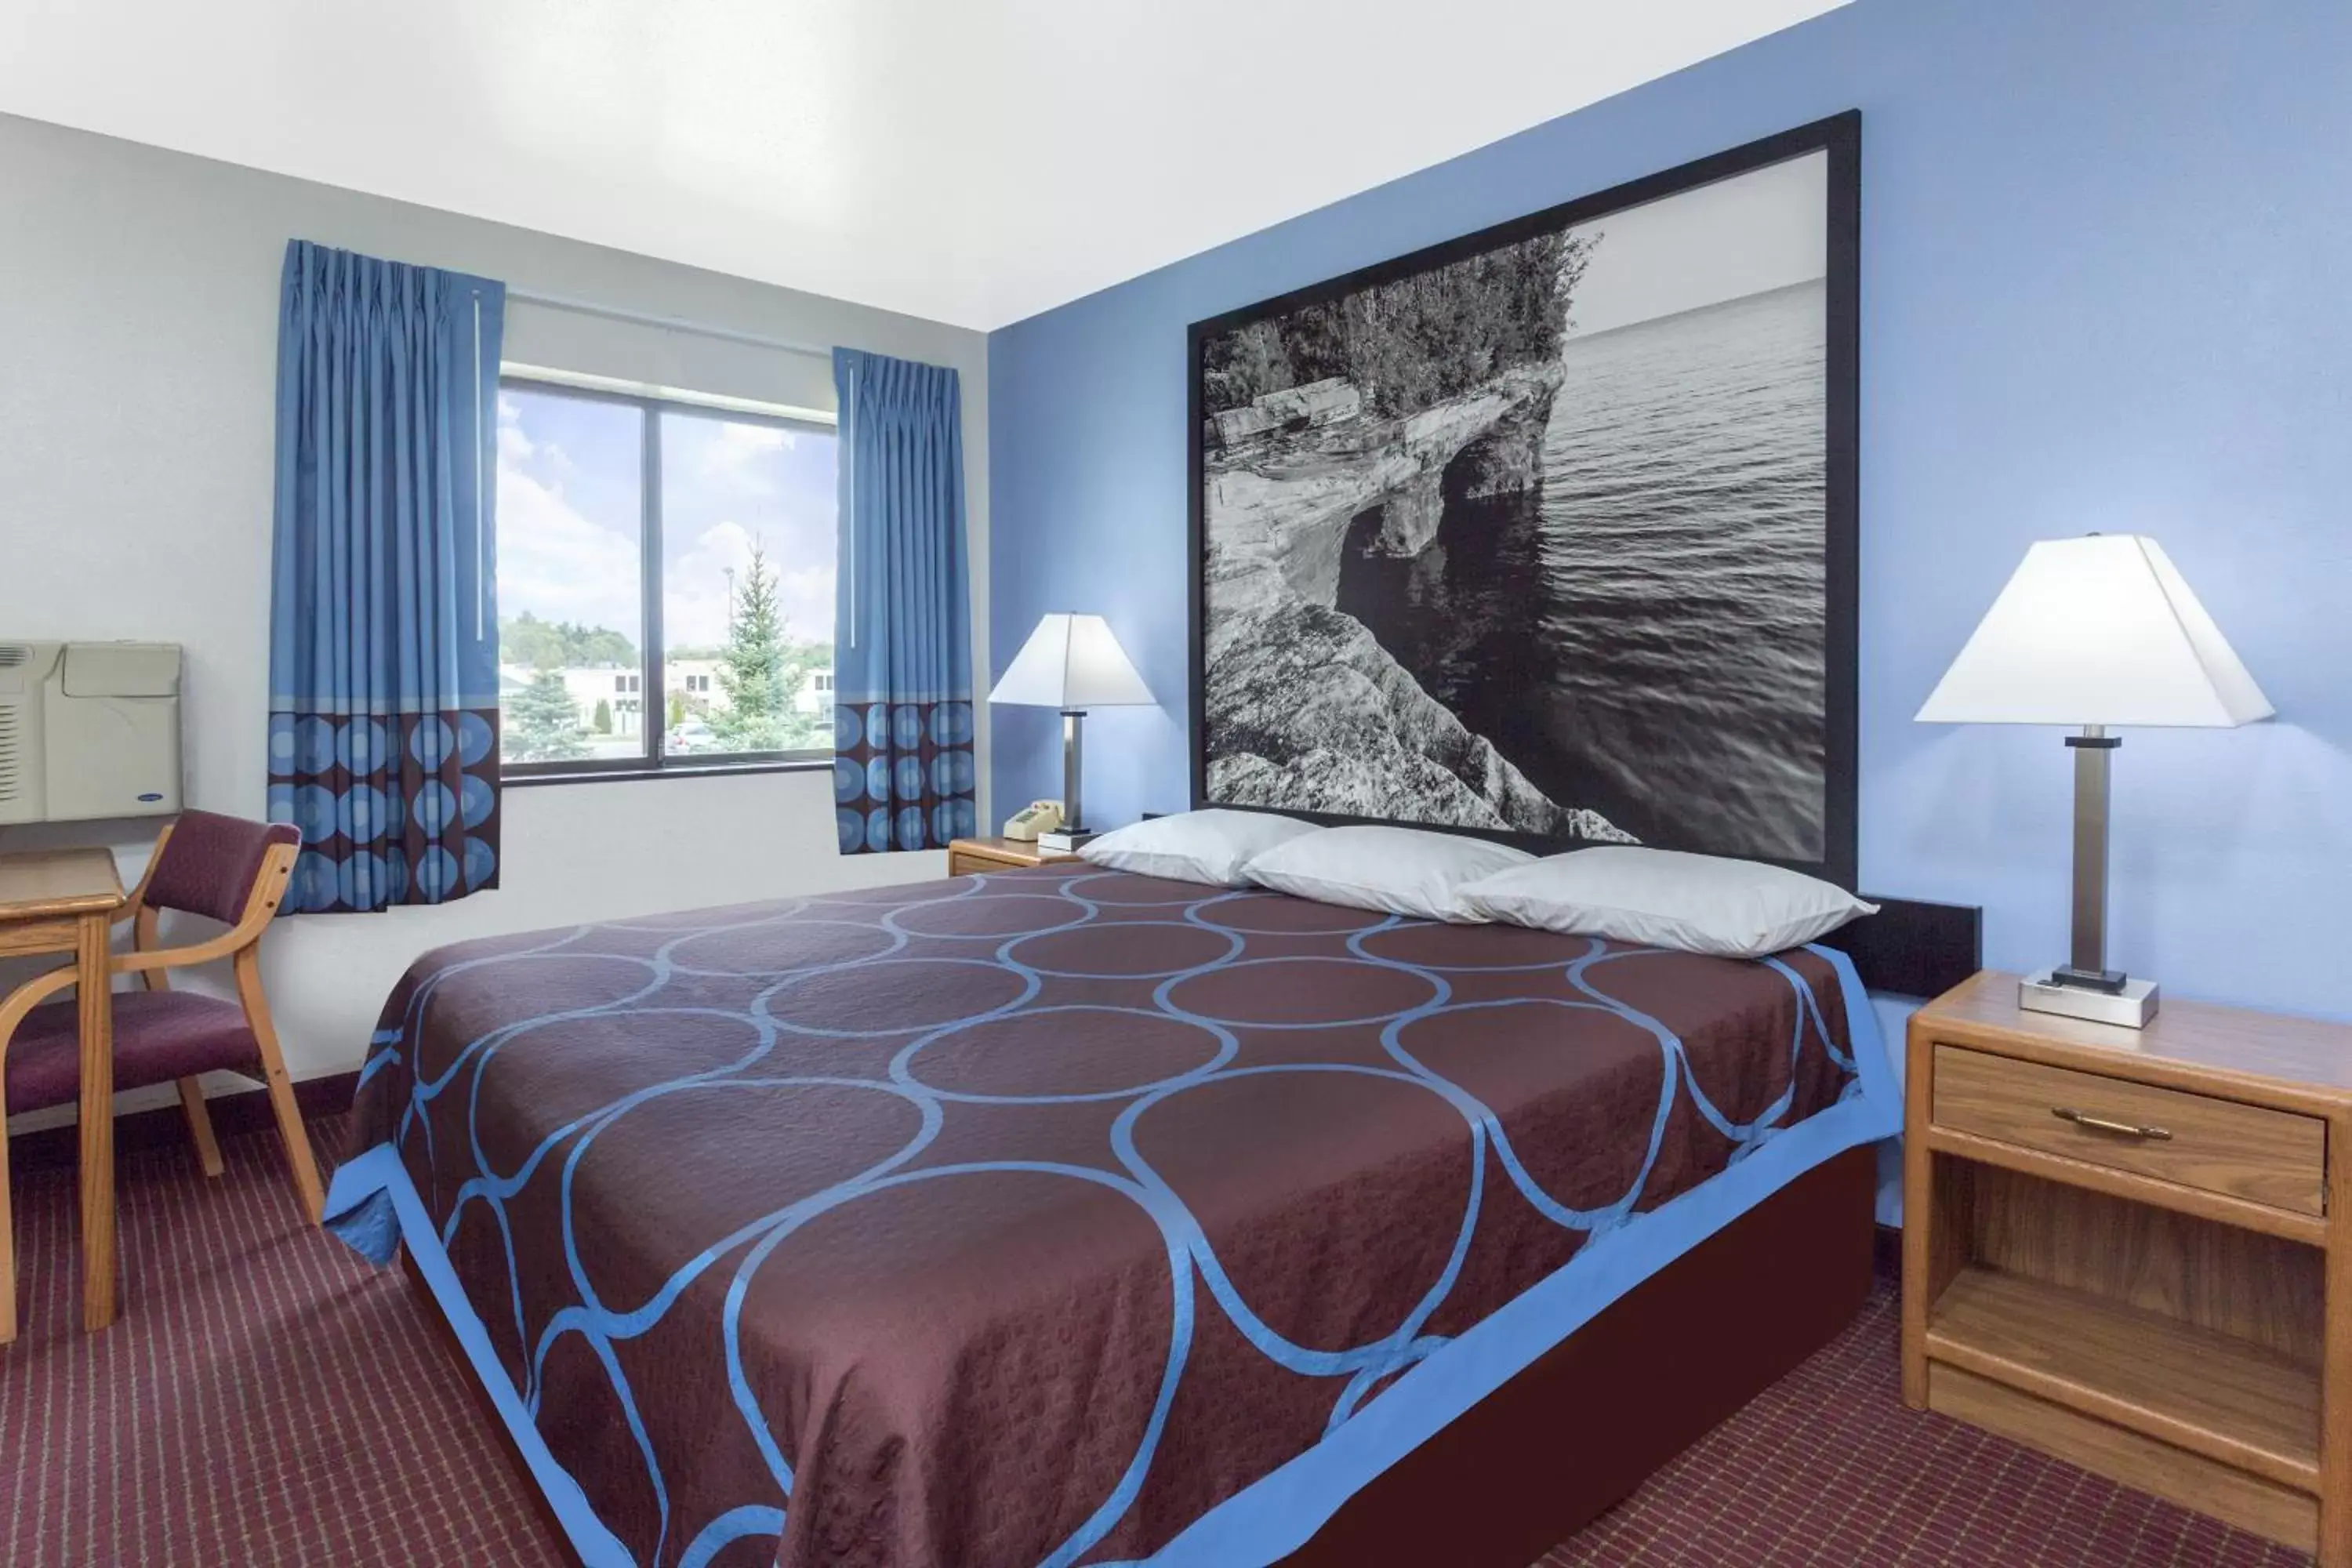 Bed, Room Photo in Super 8 by Wyndham Wisconsin Dells